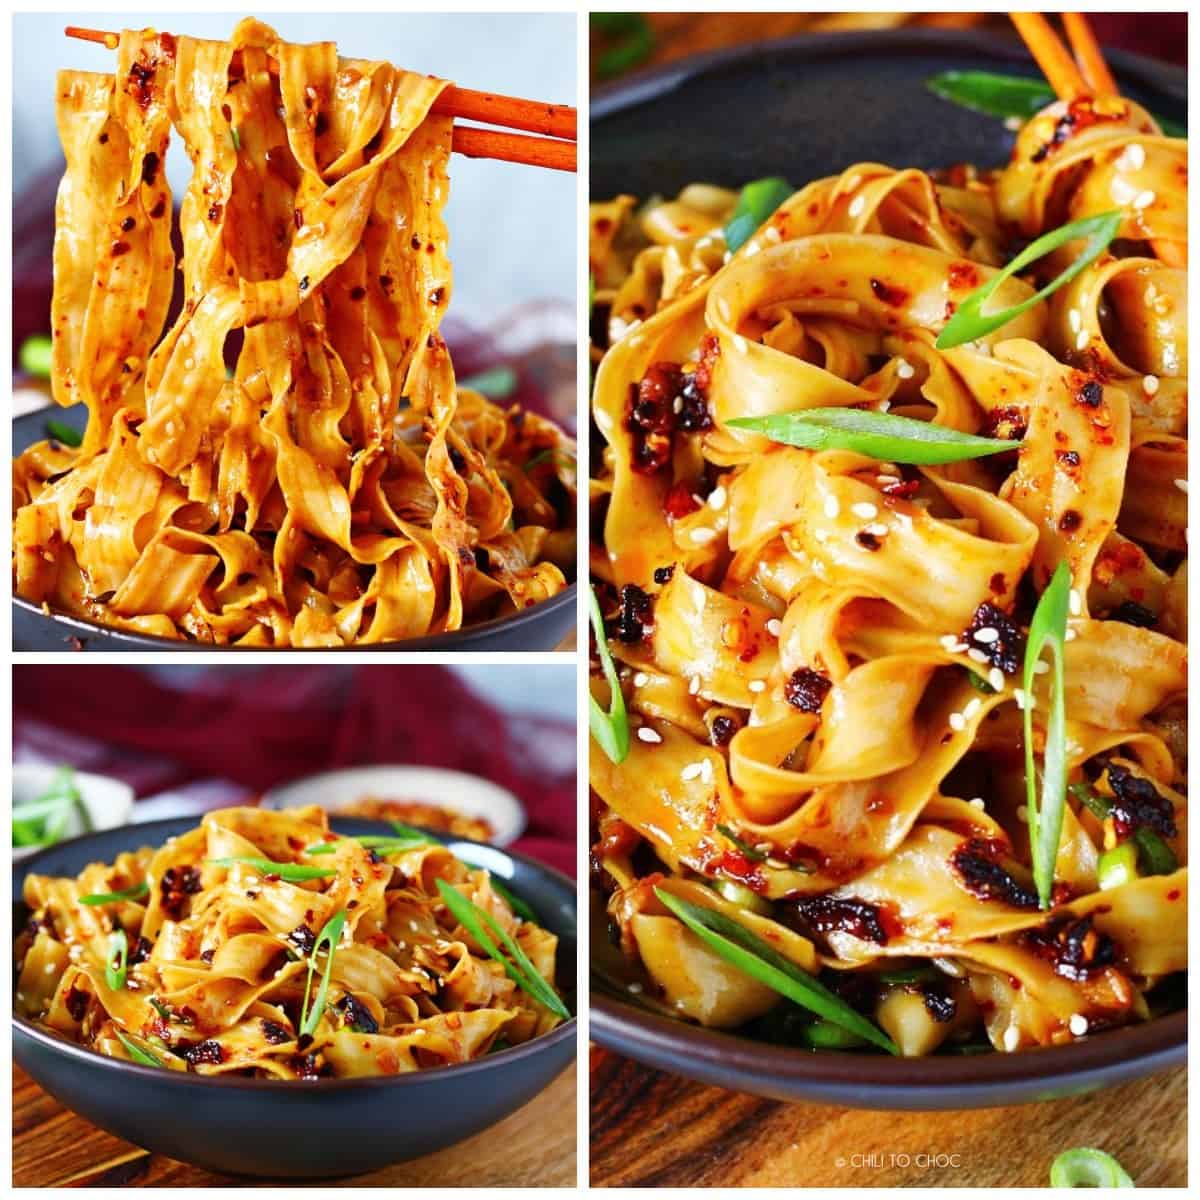 Collage of chili oil noodles held by chopsticks and placed in a bowl.